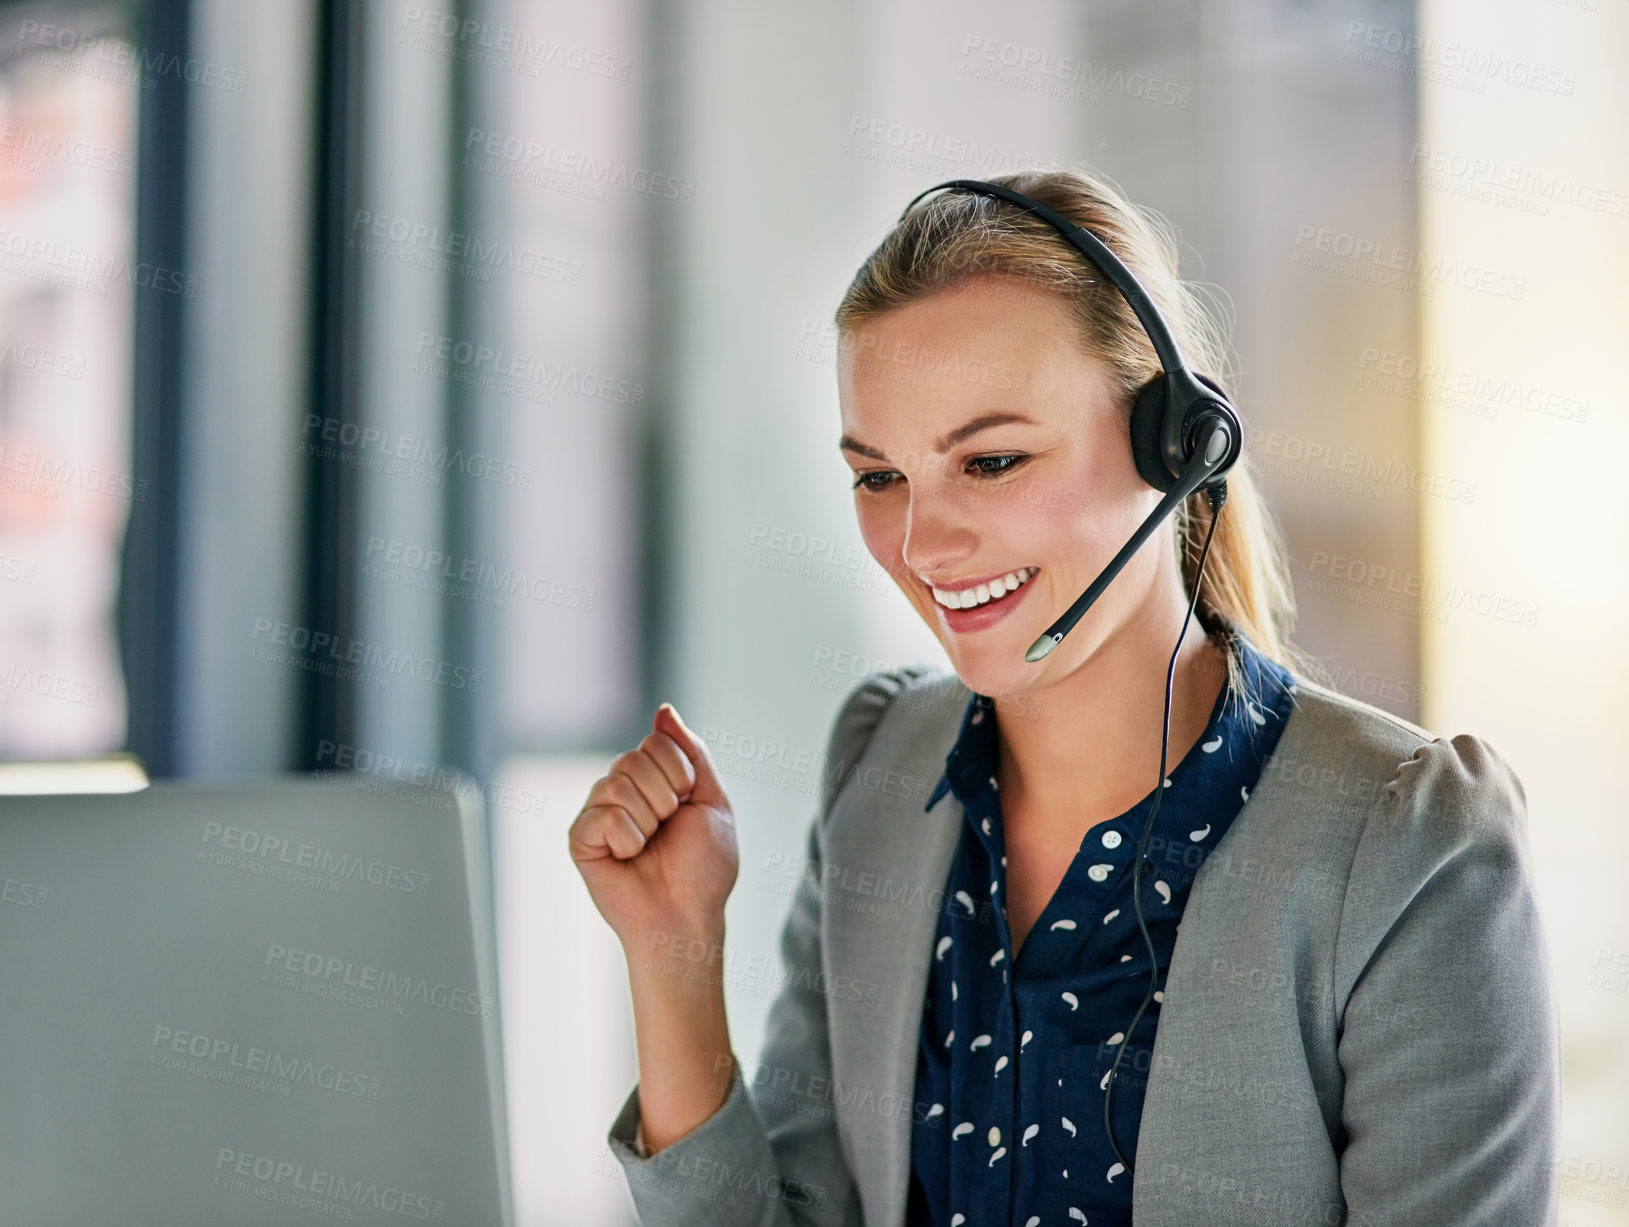 Buy stock photo Shot of an attractive young woman wearing a headset in the office